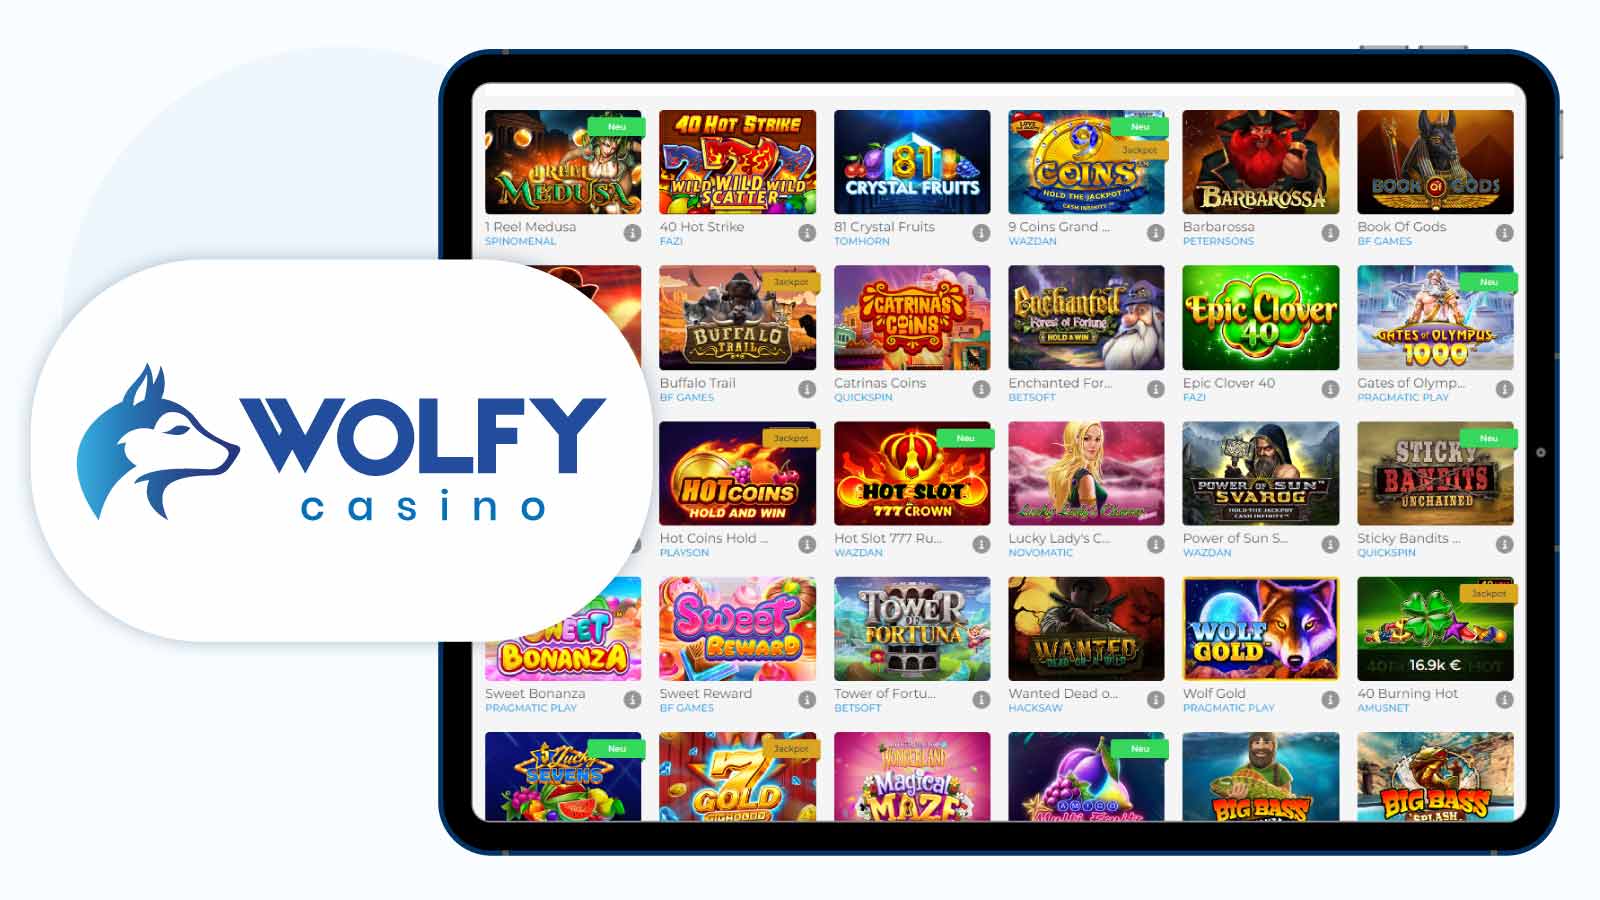 Wolfy Casino – Best Slots Site with Free Spins No Deposit No Wagering Bonus